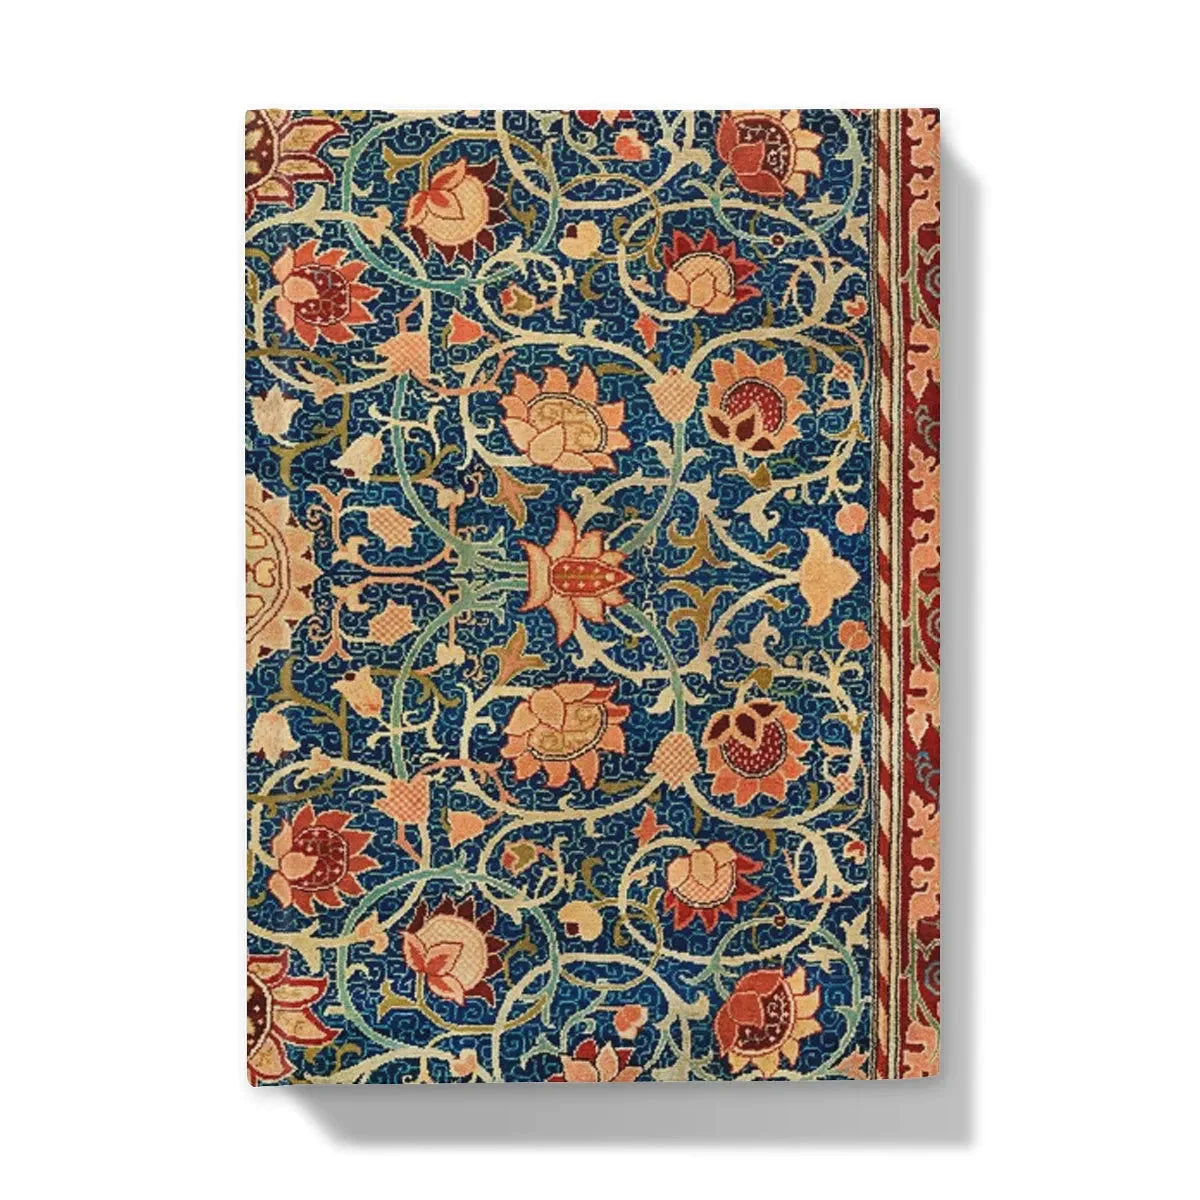 Holland Park Carpet By William Morris Hardback Journal - 5’x7’ / 5’ x 7’ - Lined Paper - Notebooks & Notepads